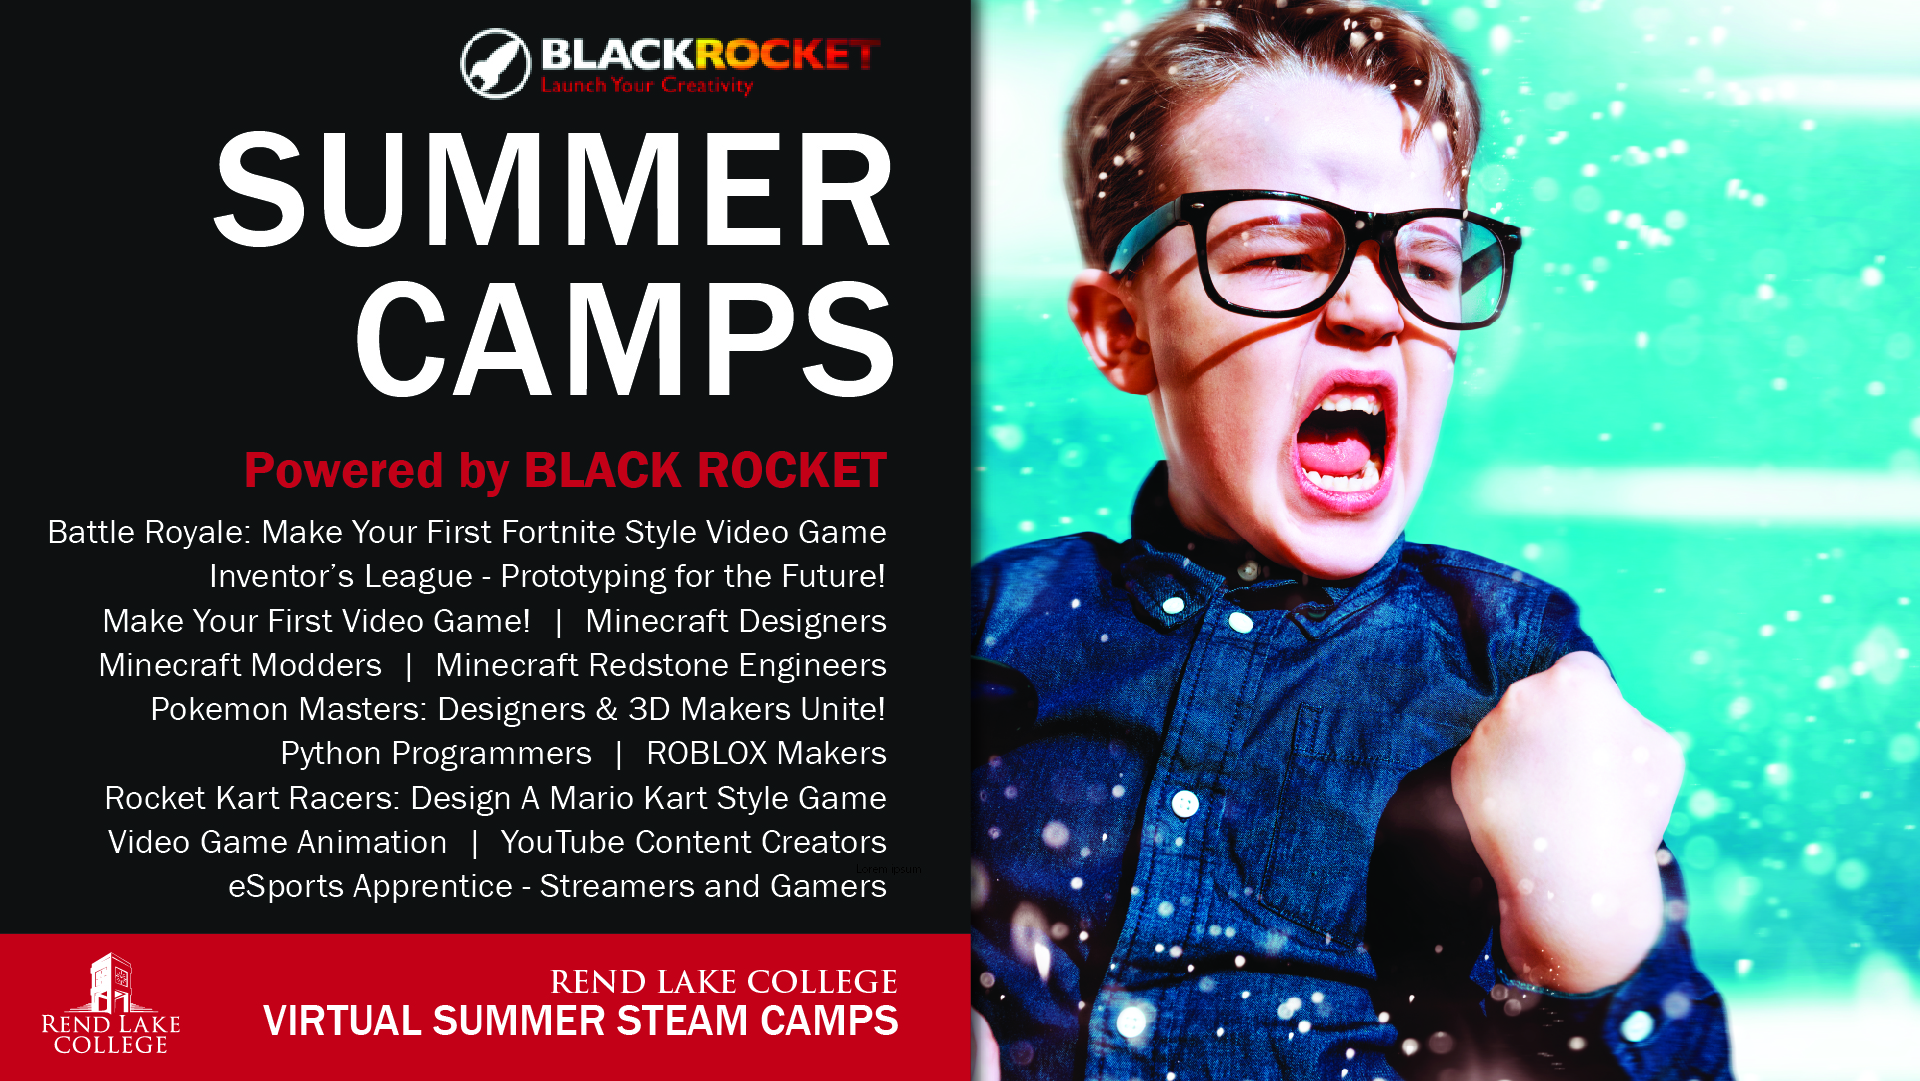 Sign Up For Virtual Kids Camps At Rlc Rend Lake College - roblox camping part 29 fun house youtube